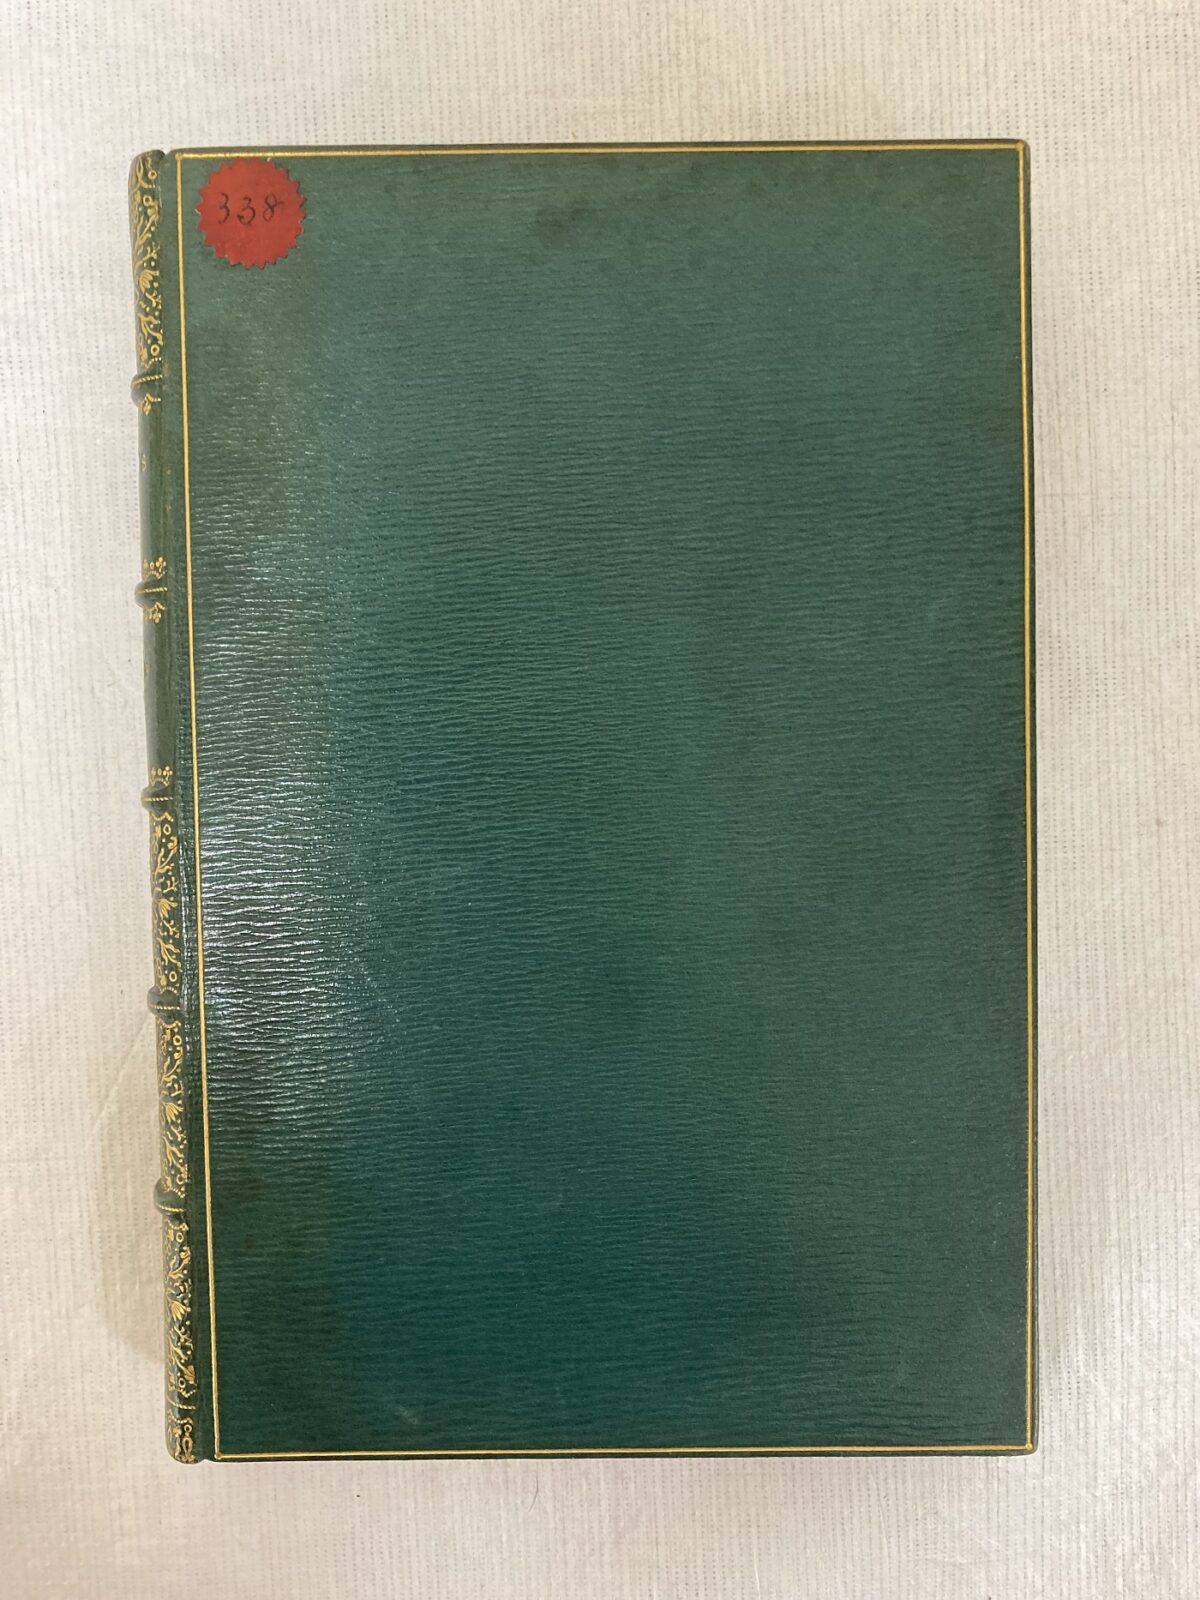 Front cover of The Task, William Cowper, 1785